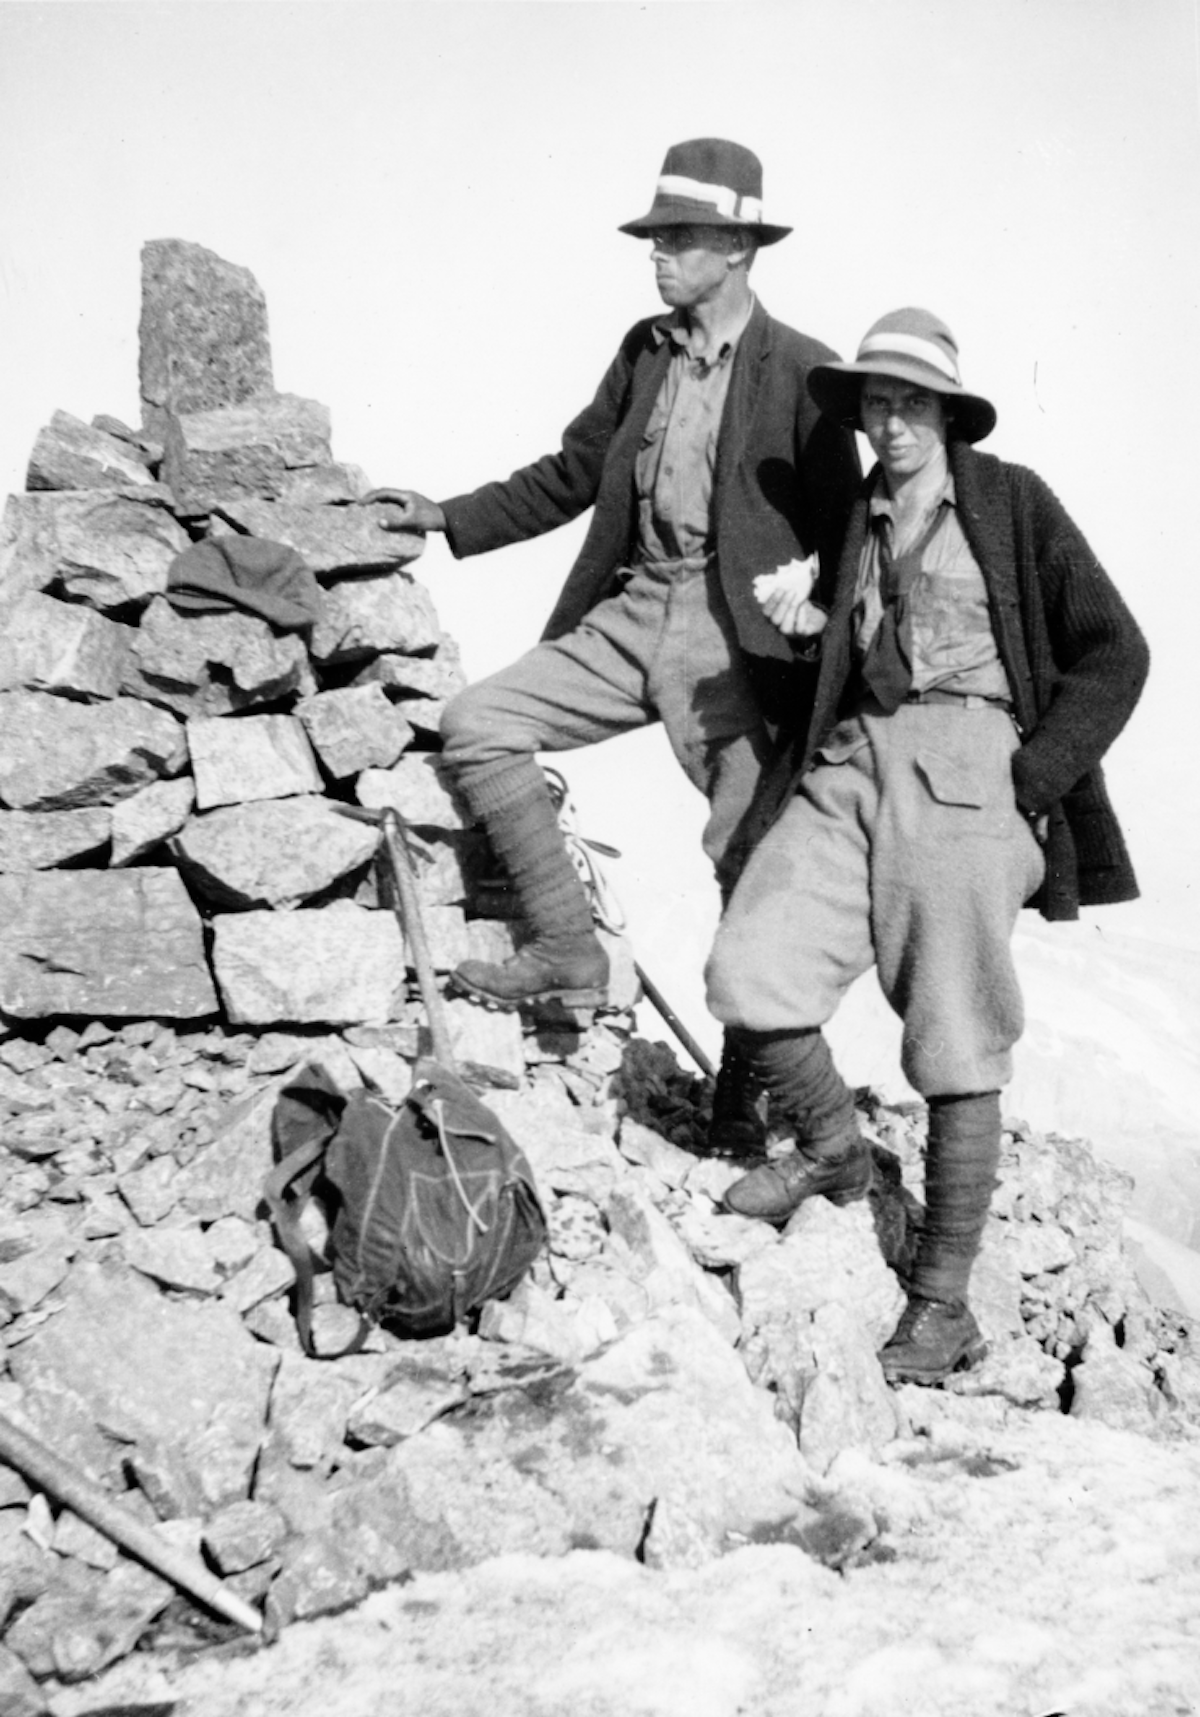 Phyllis and Don Munday on summit of Mount Victoria, Canadian Rockies, from Alpine Club camp, 1925. NVMA 5650